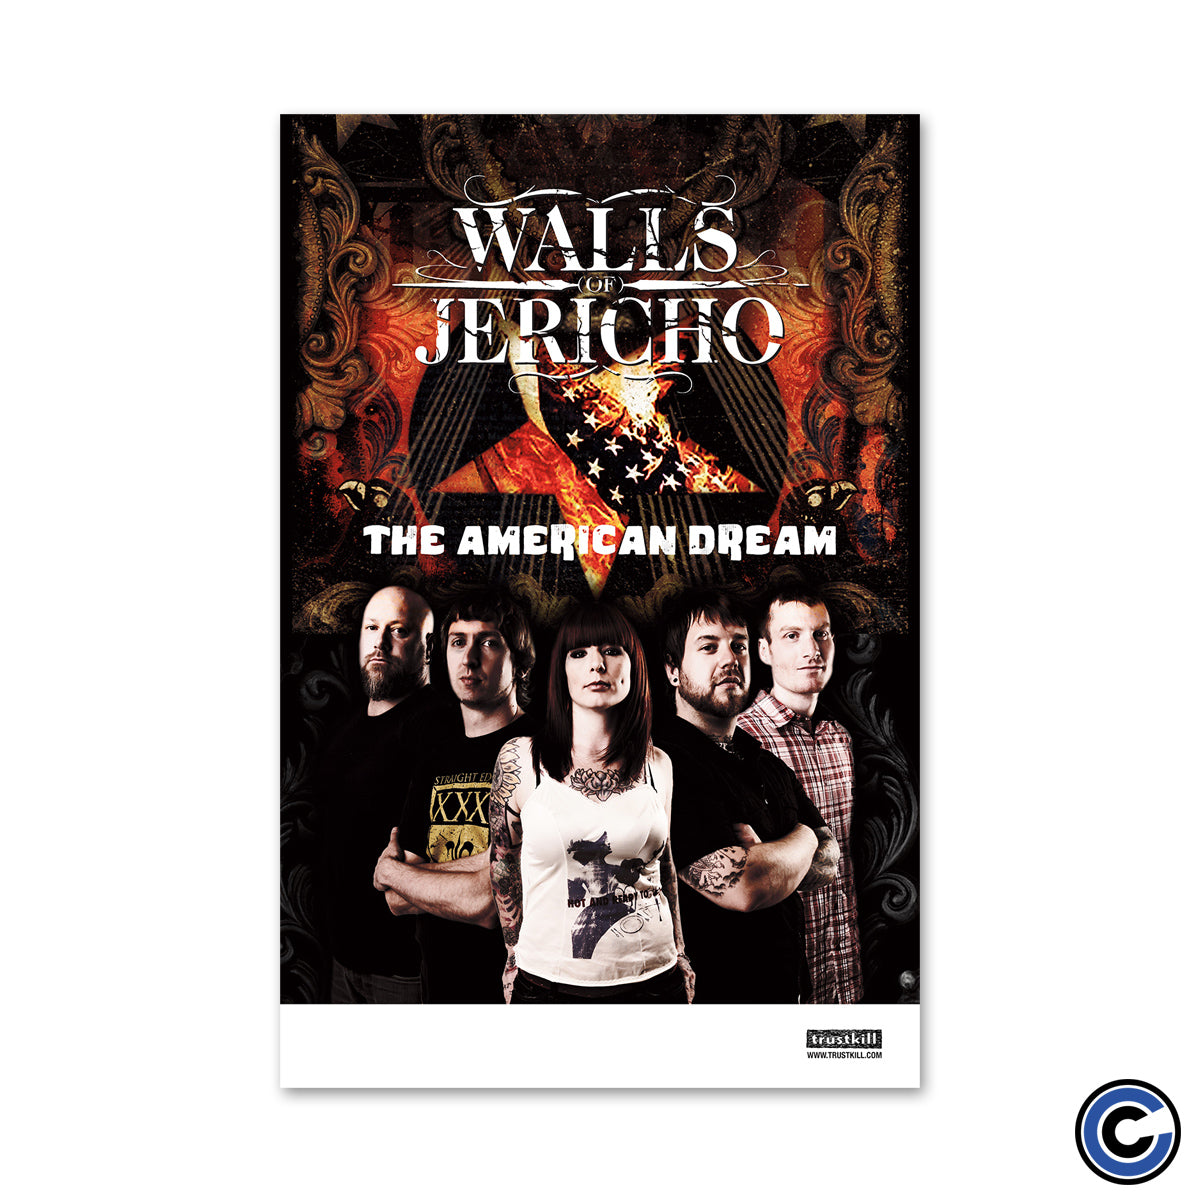 Walls of Jericho "The American Dream" Poster